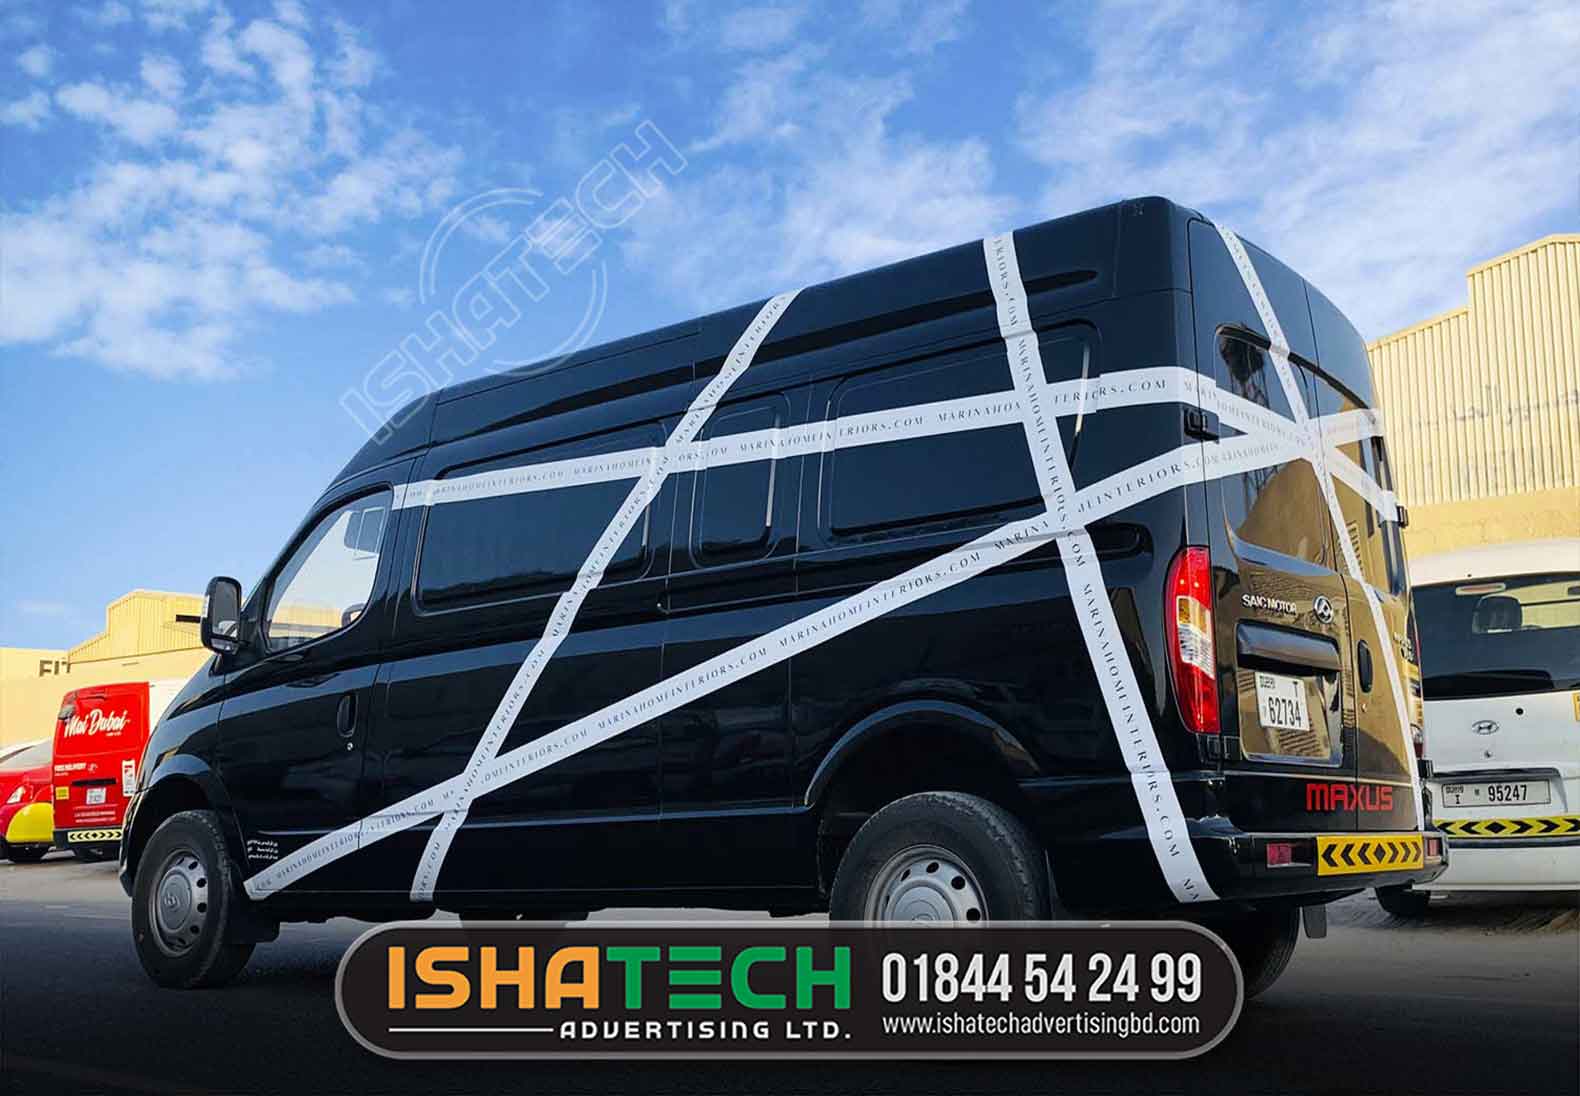 Vehicle Wrap Services in Singapore